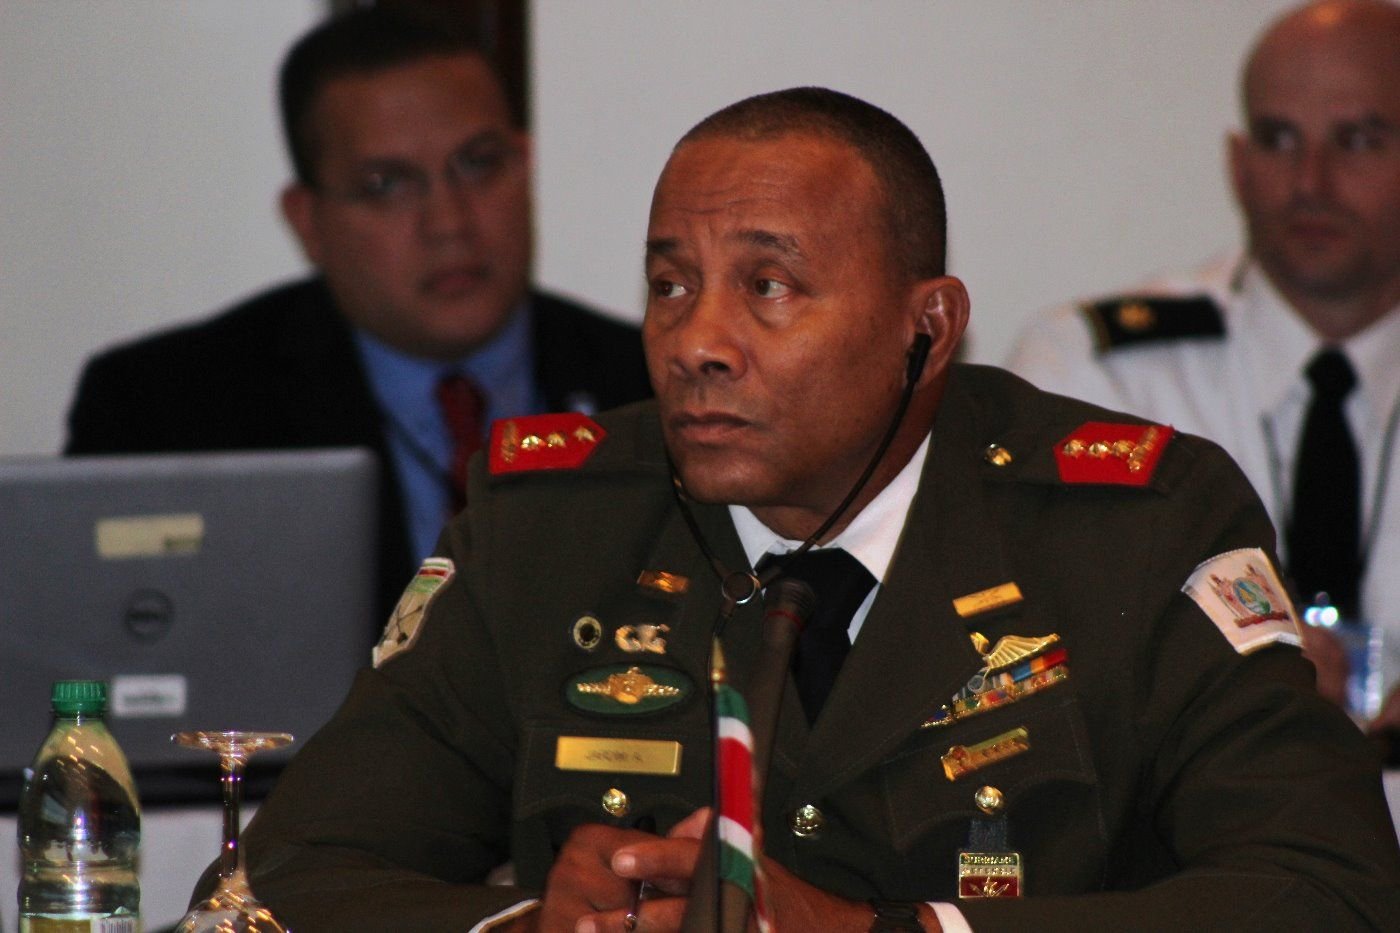 Suriname Sees Transnational Criminal Networks as Biggest Security Challenge